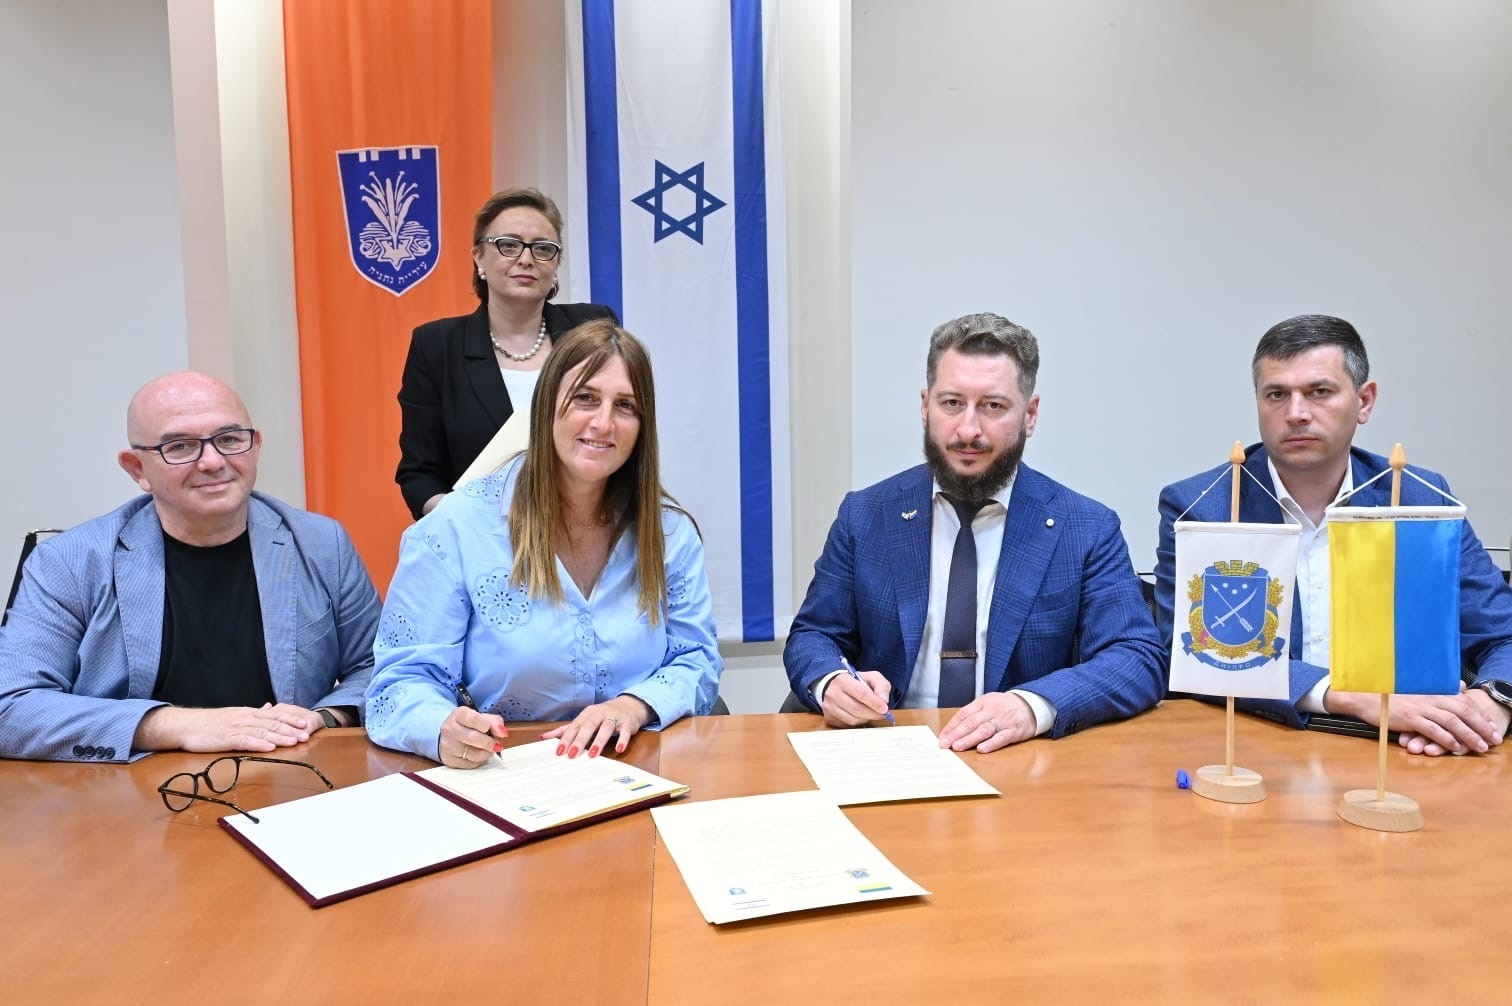 Dnipro has signed a friendship agreement with the Israeli city of Netanya